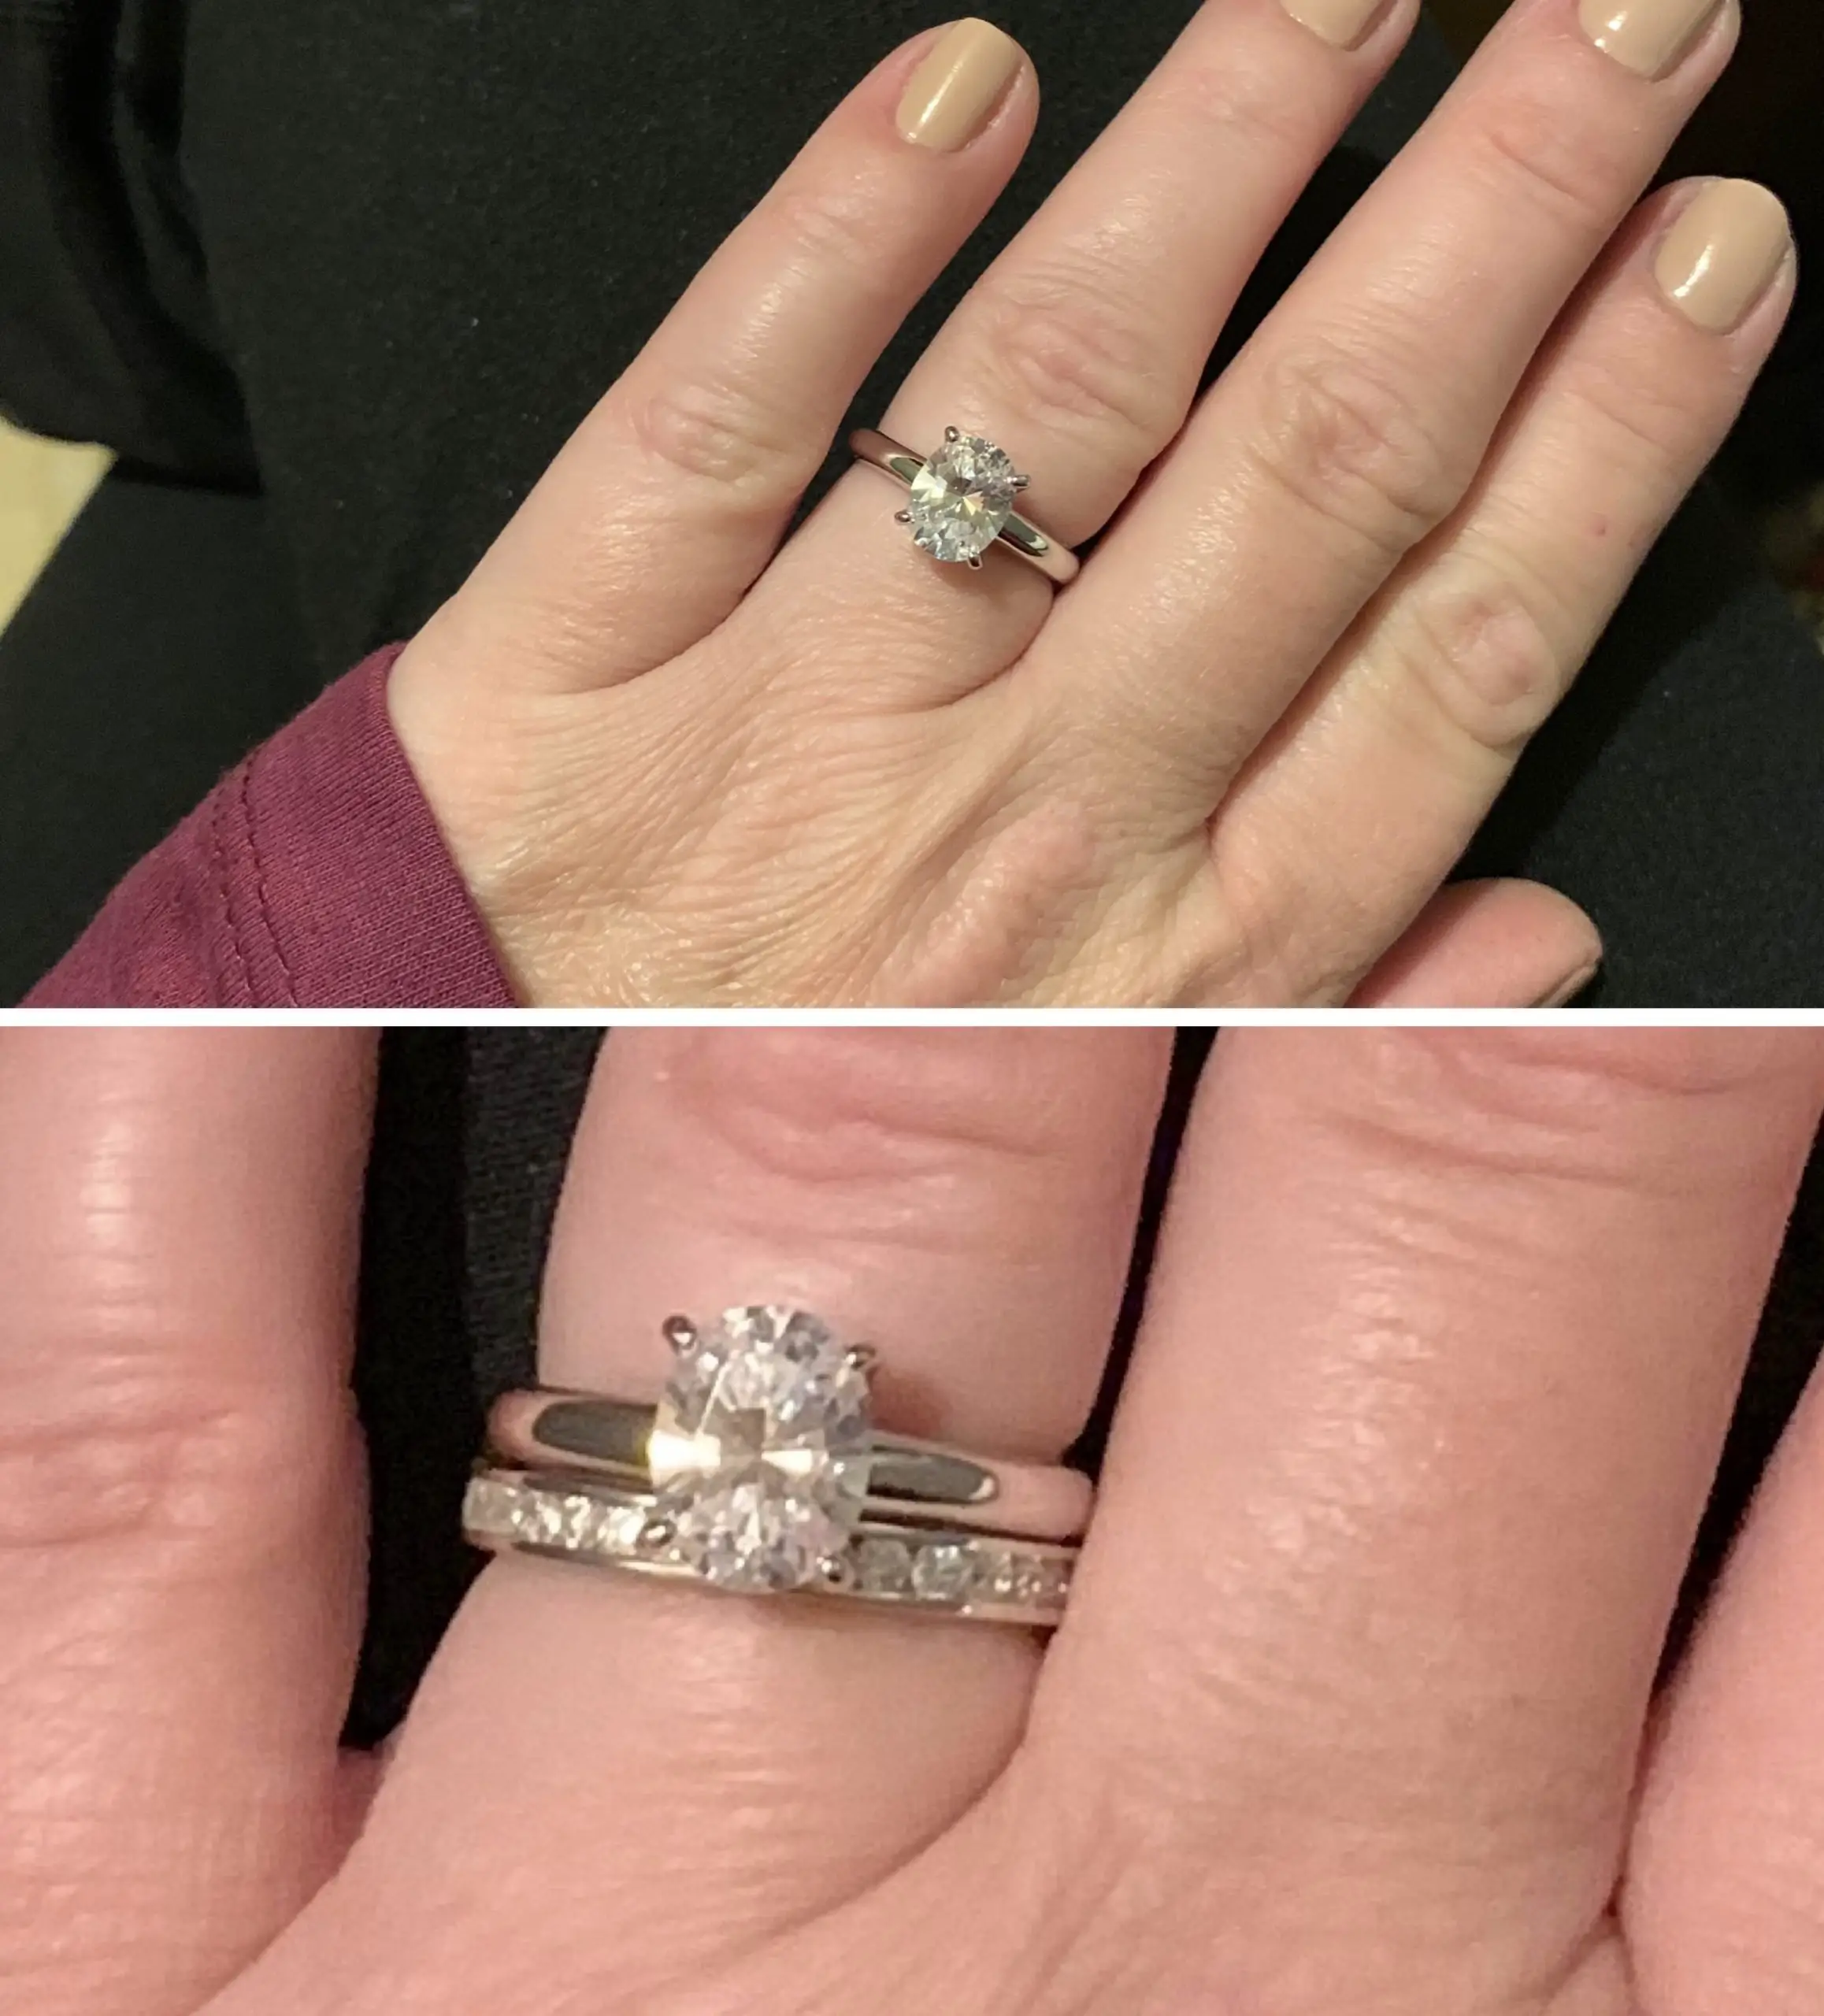 Show me your wedding bands with your engagement ring